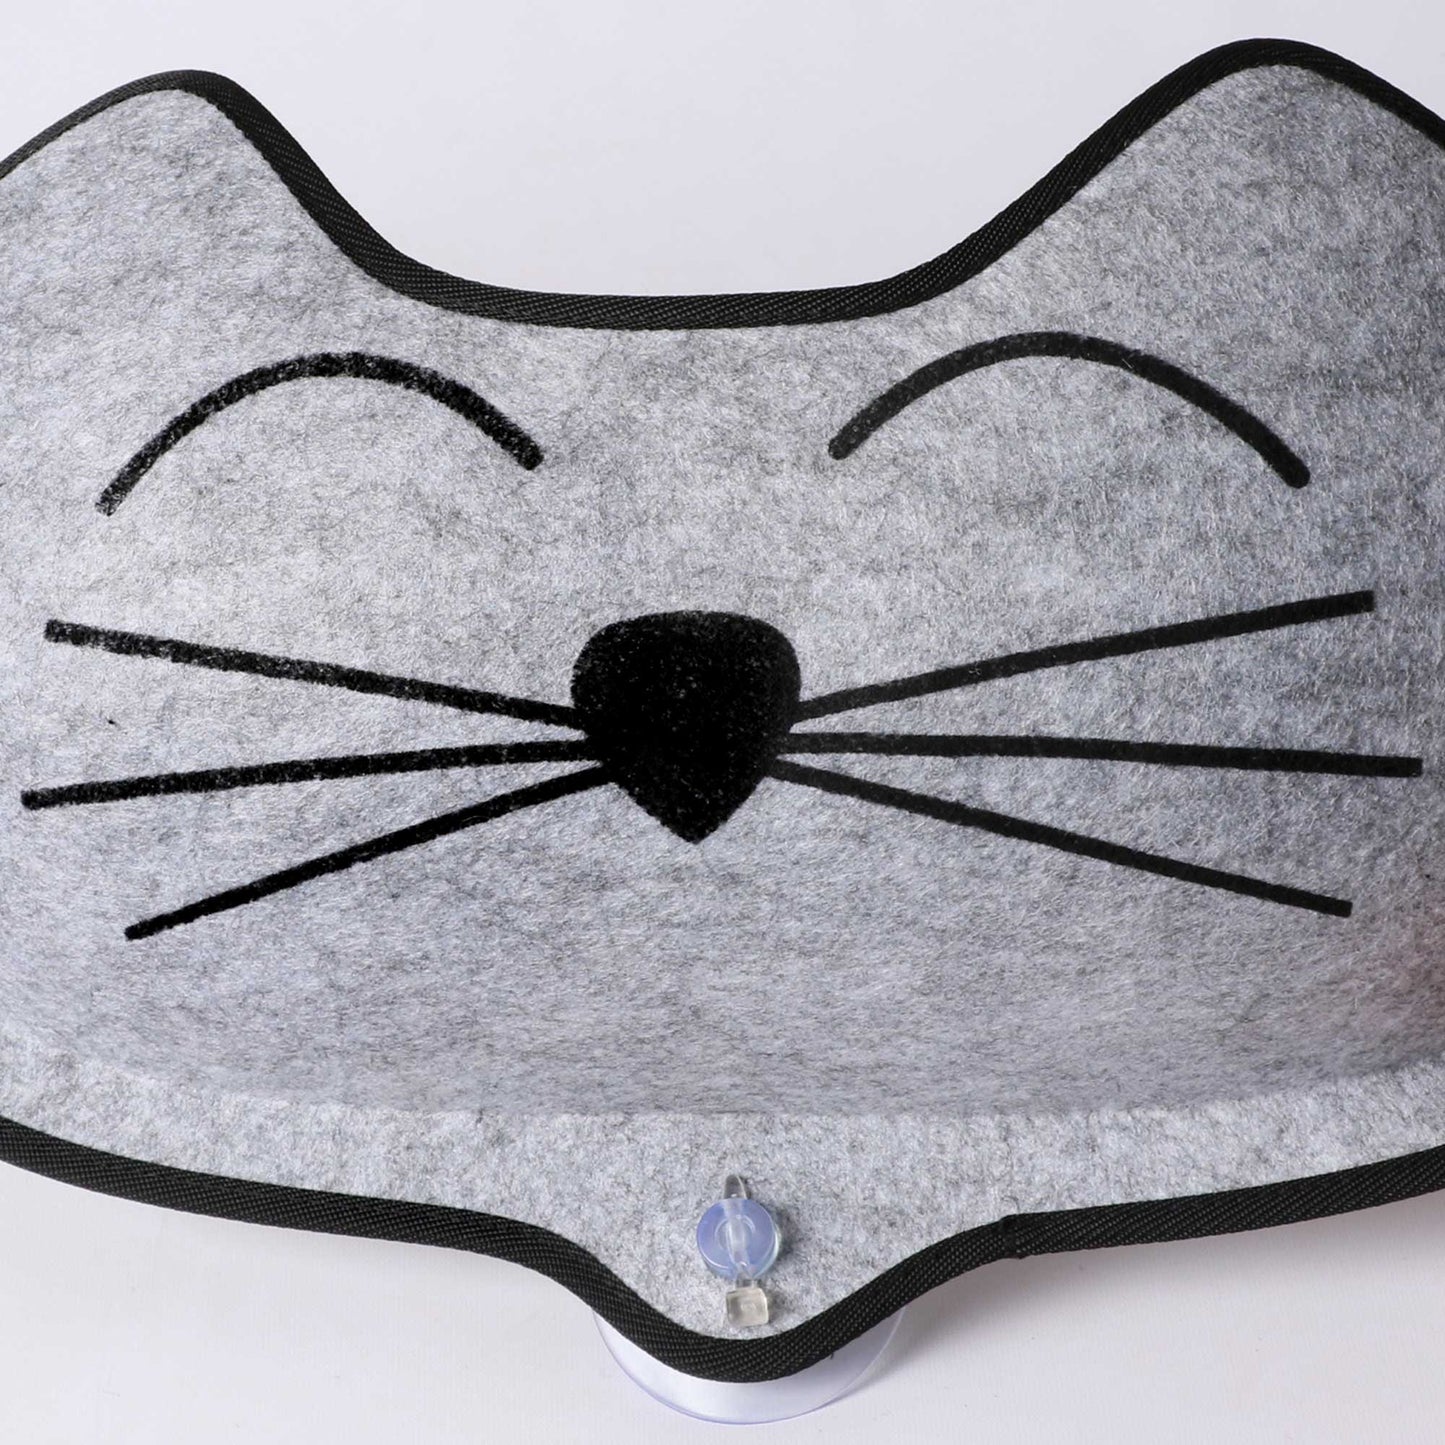 K&H Pet Products EZ Mount Kittyface Window Bed Gray 27" x 8" x 11"